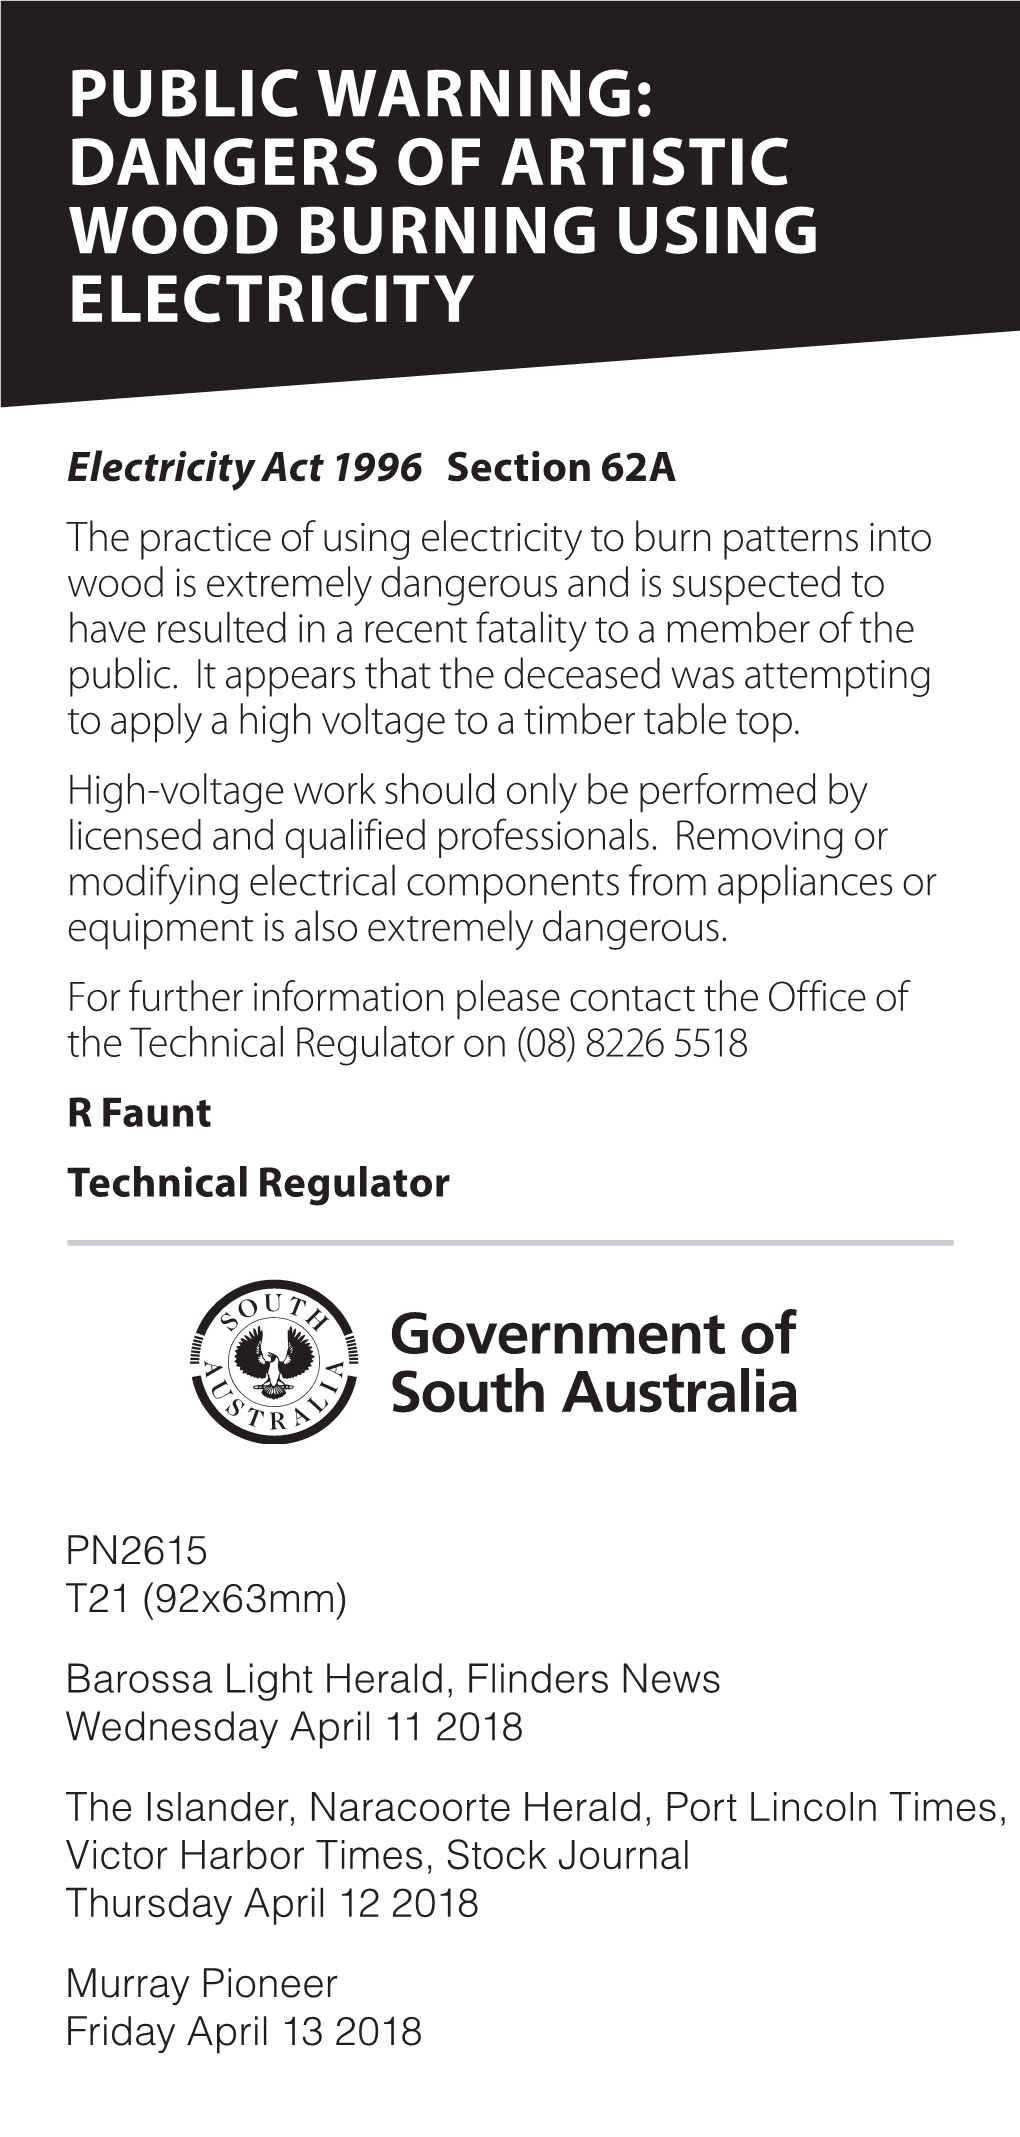 Public Warning: Dangers of Artistic Wood Burning Using Electricity